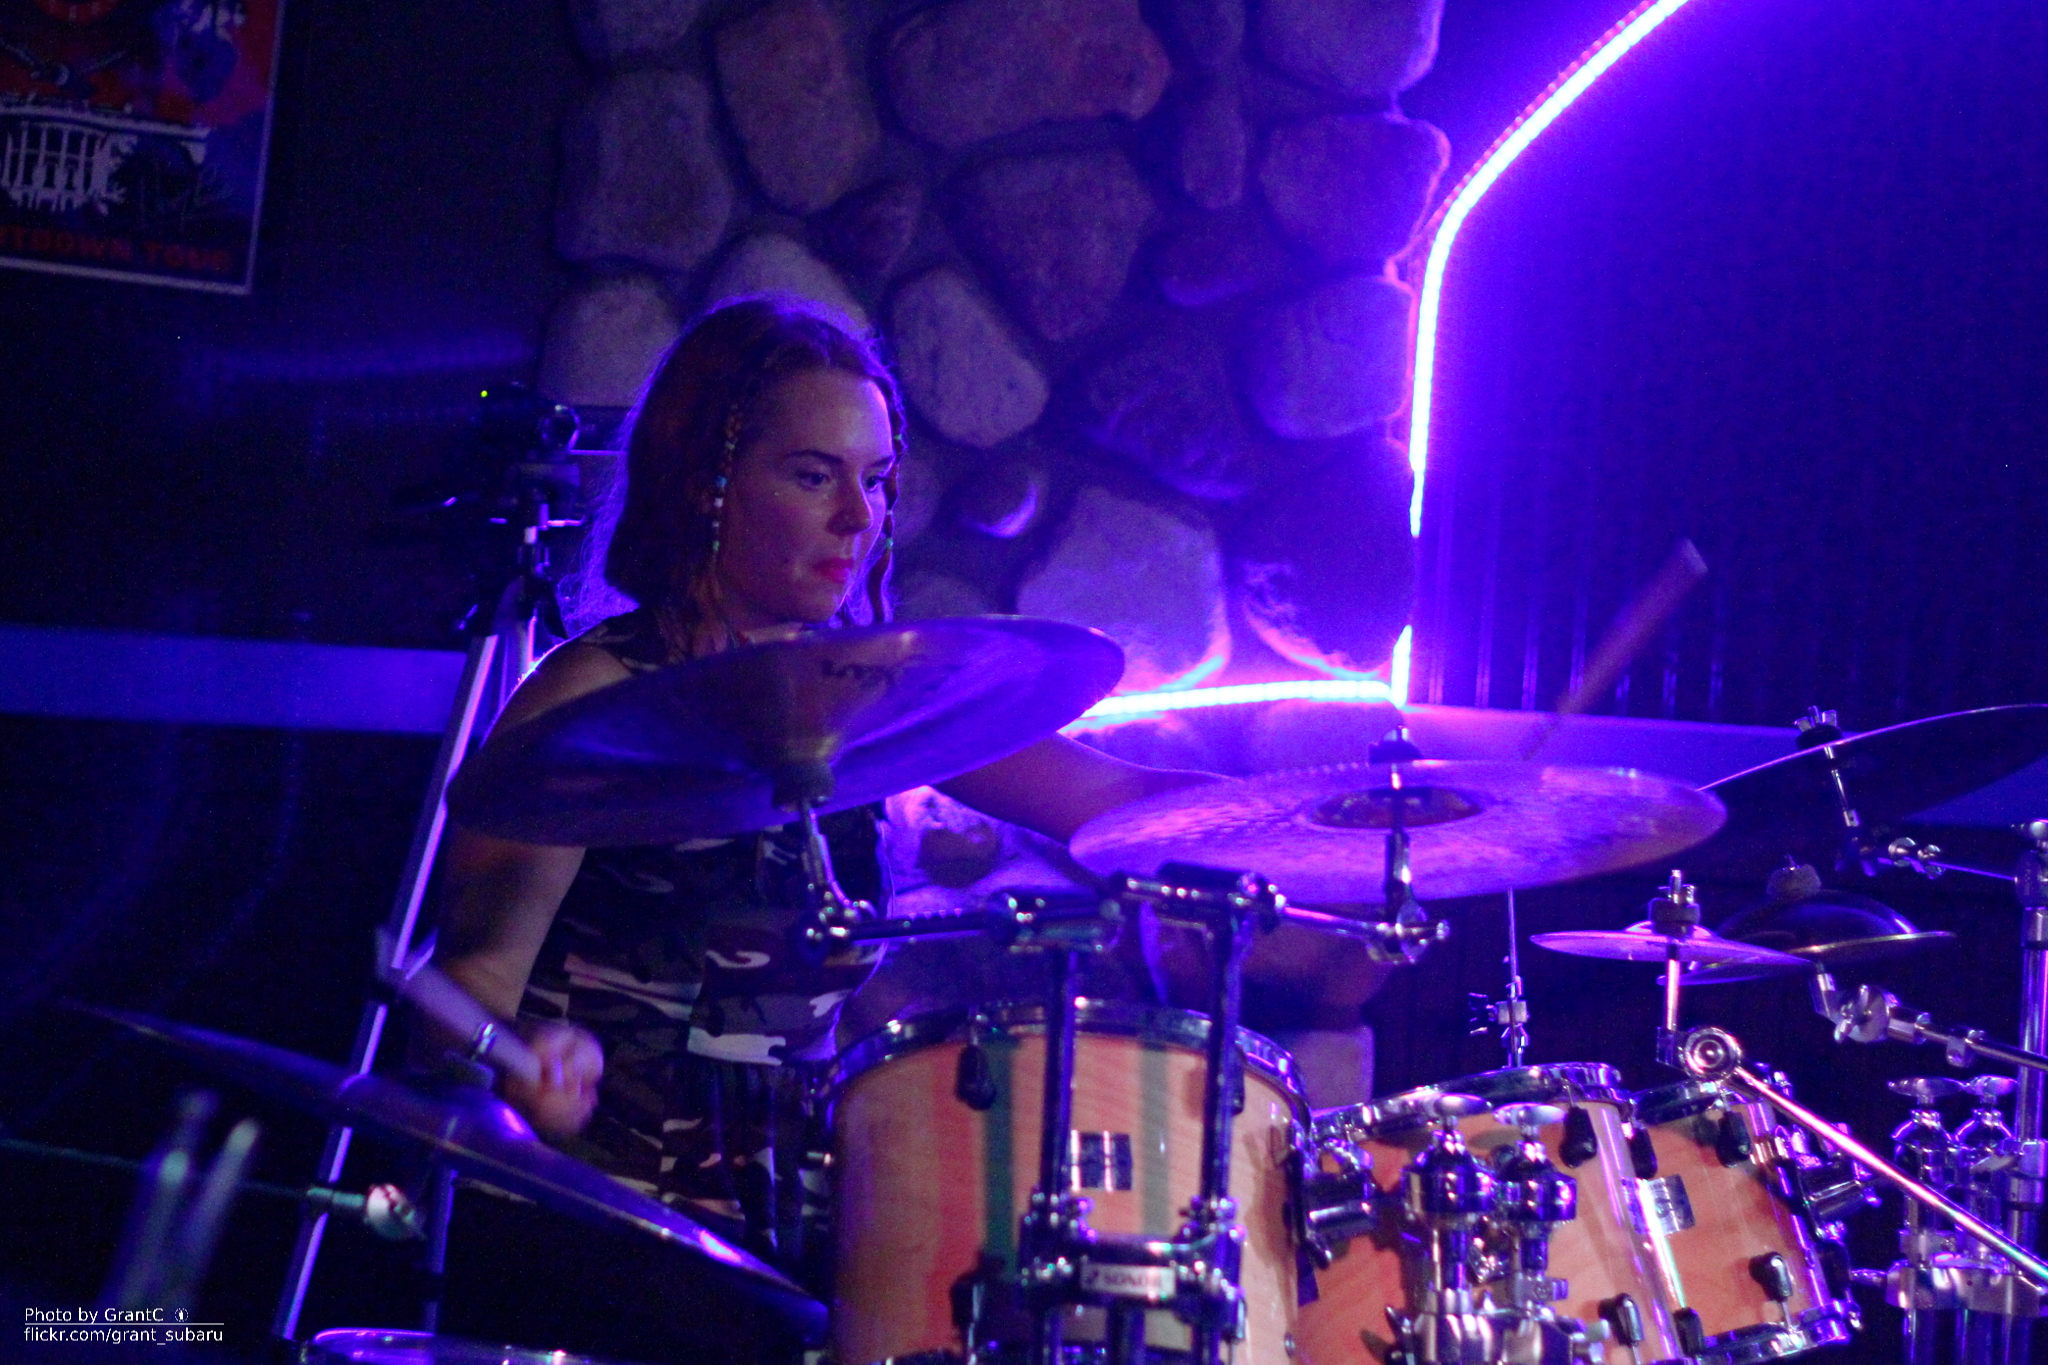 a girl plays drums in front of purple lights